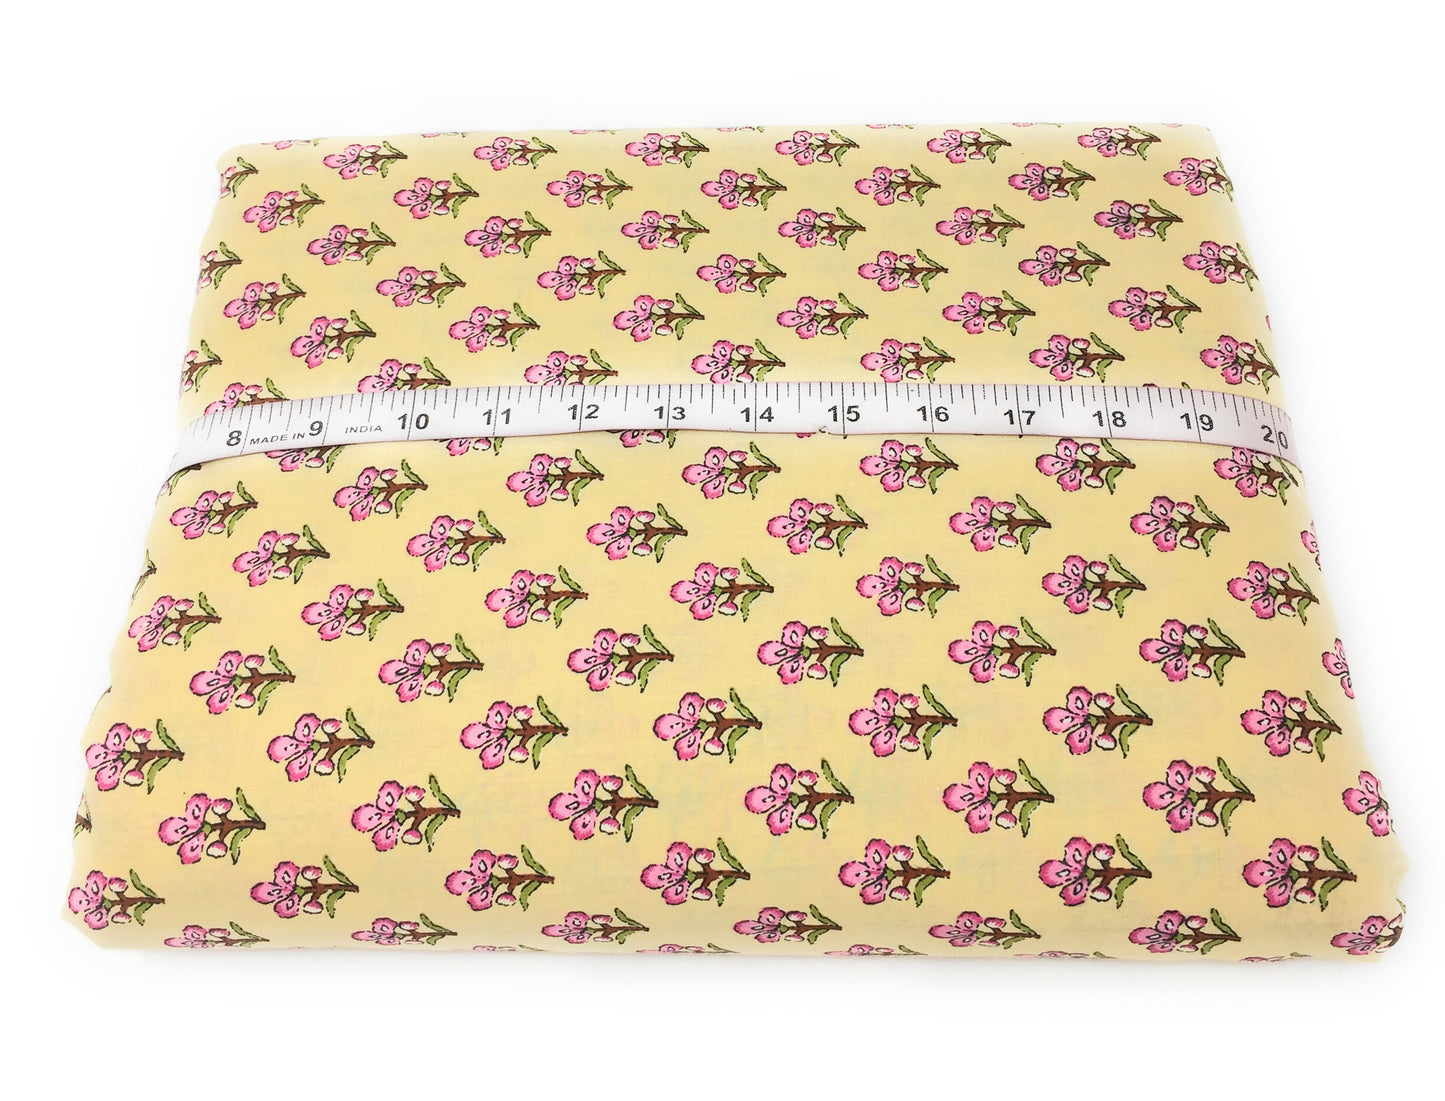 Printed Cotton Fabric Material Small Flower Pattern